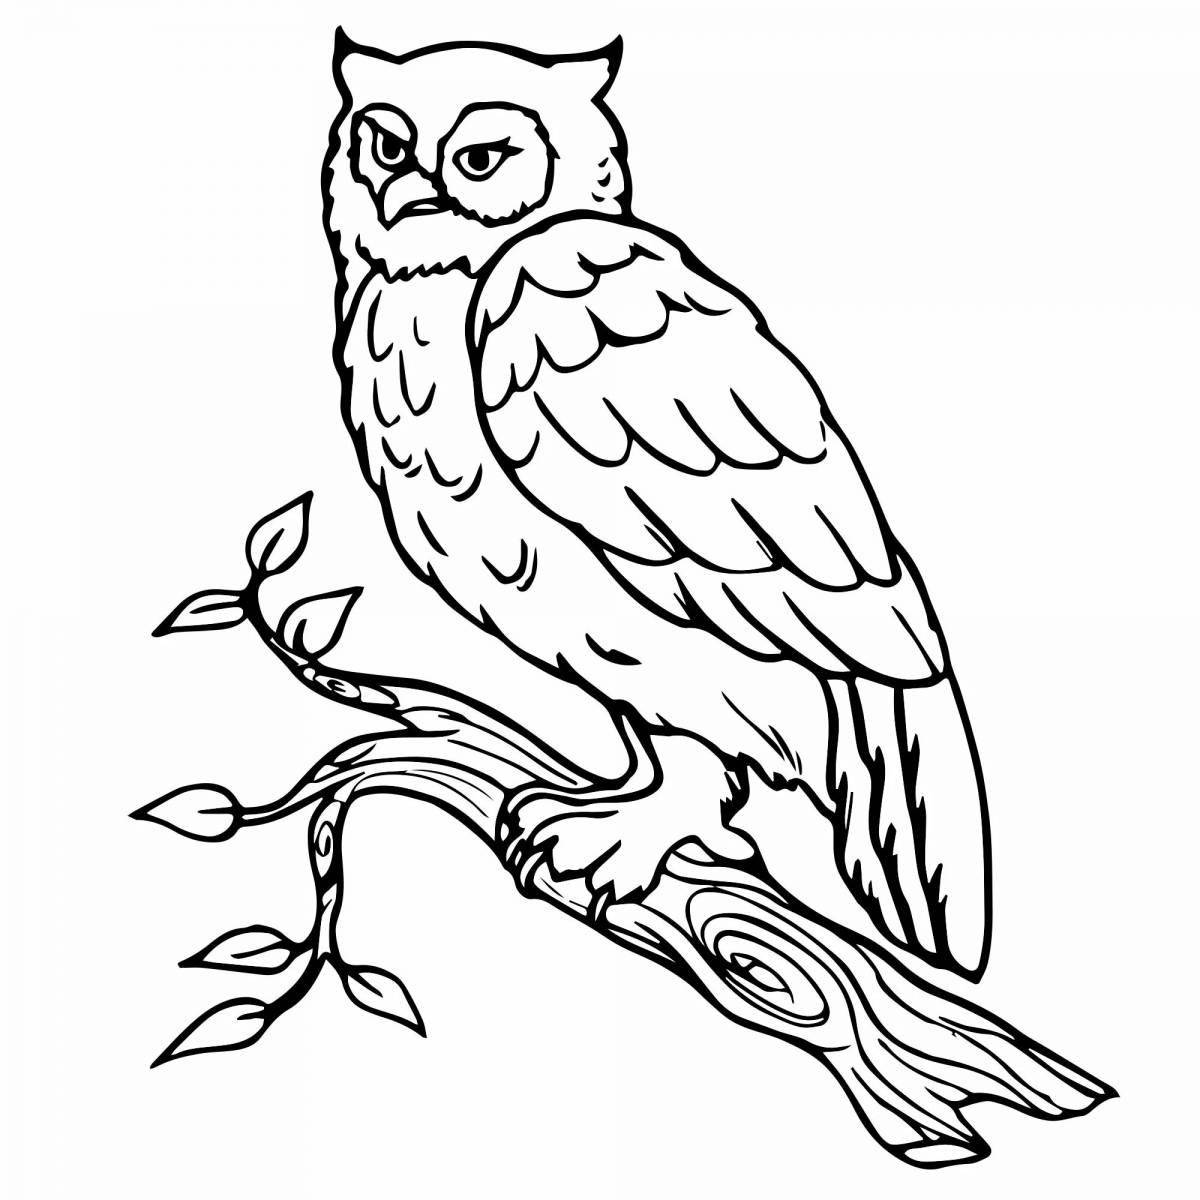 Awesome owl coloring page on a tree